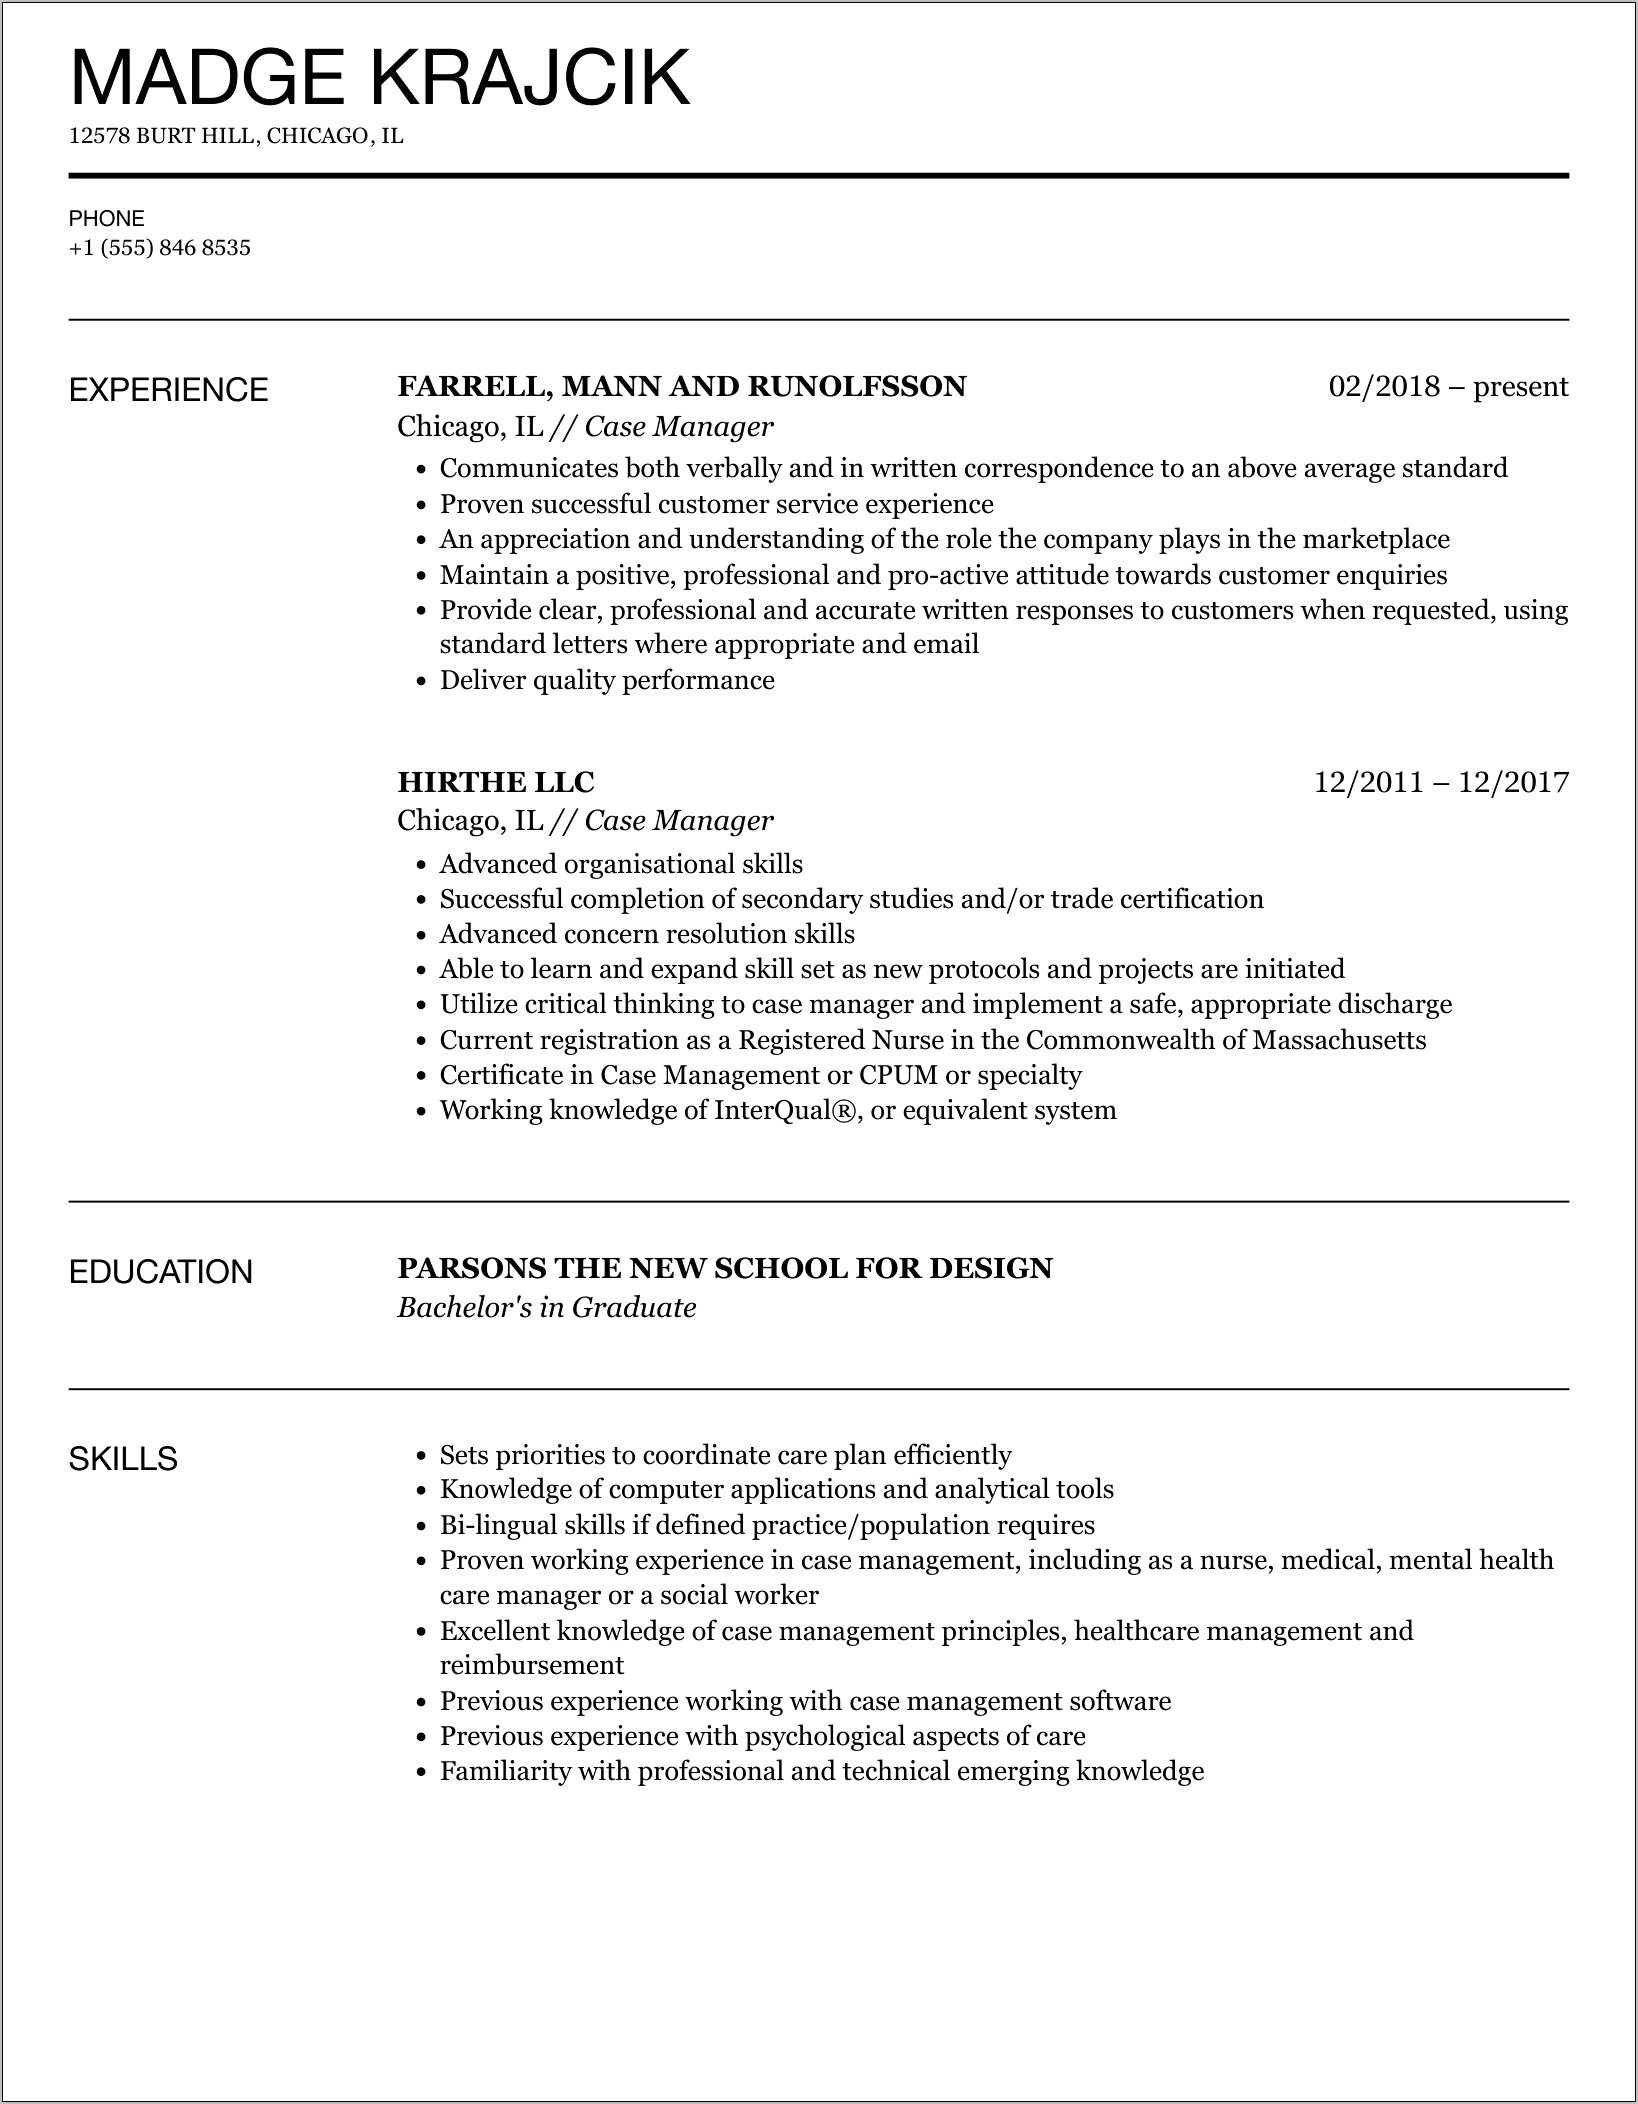 Professional Resume For Case Manager